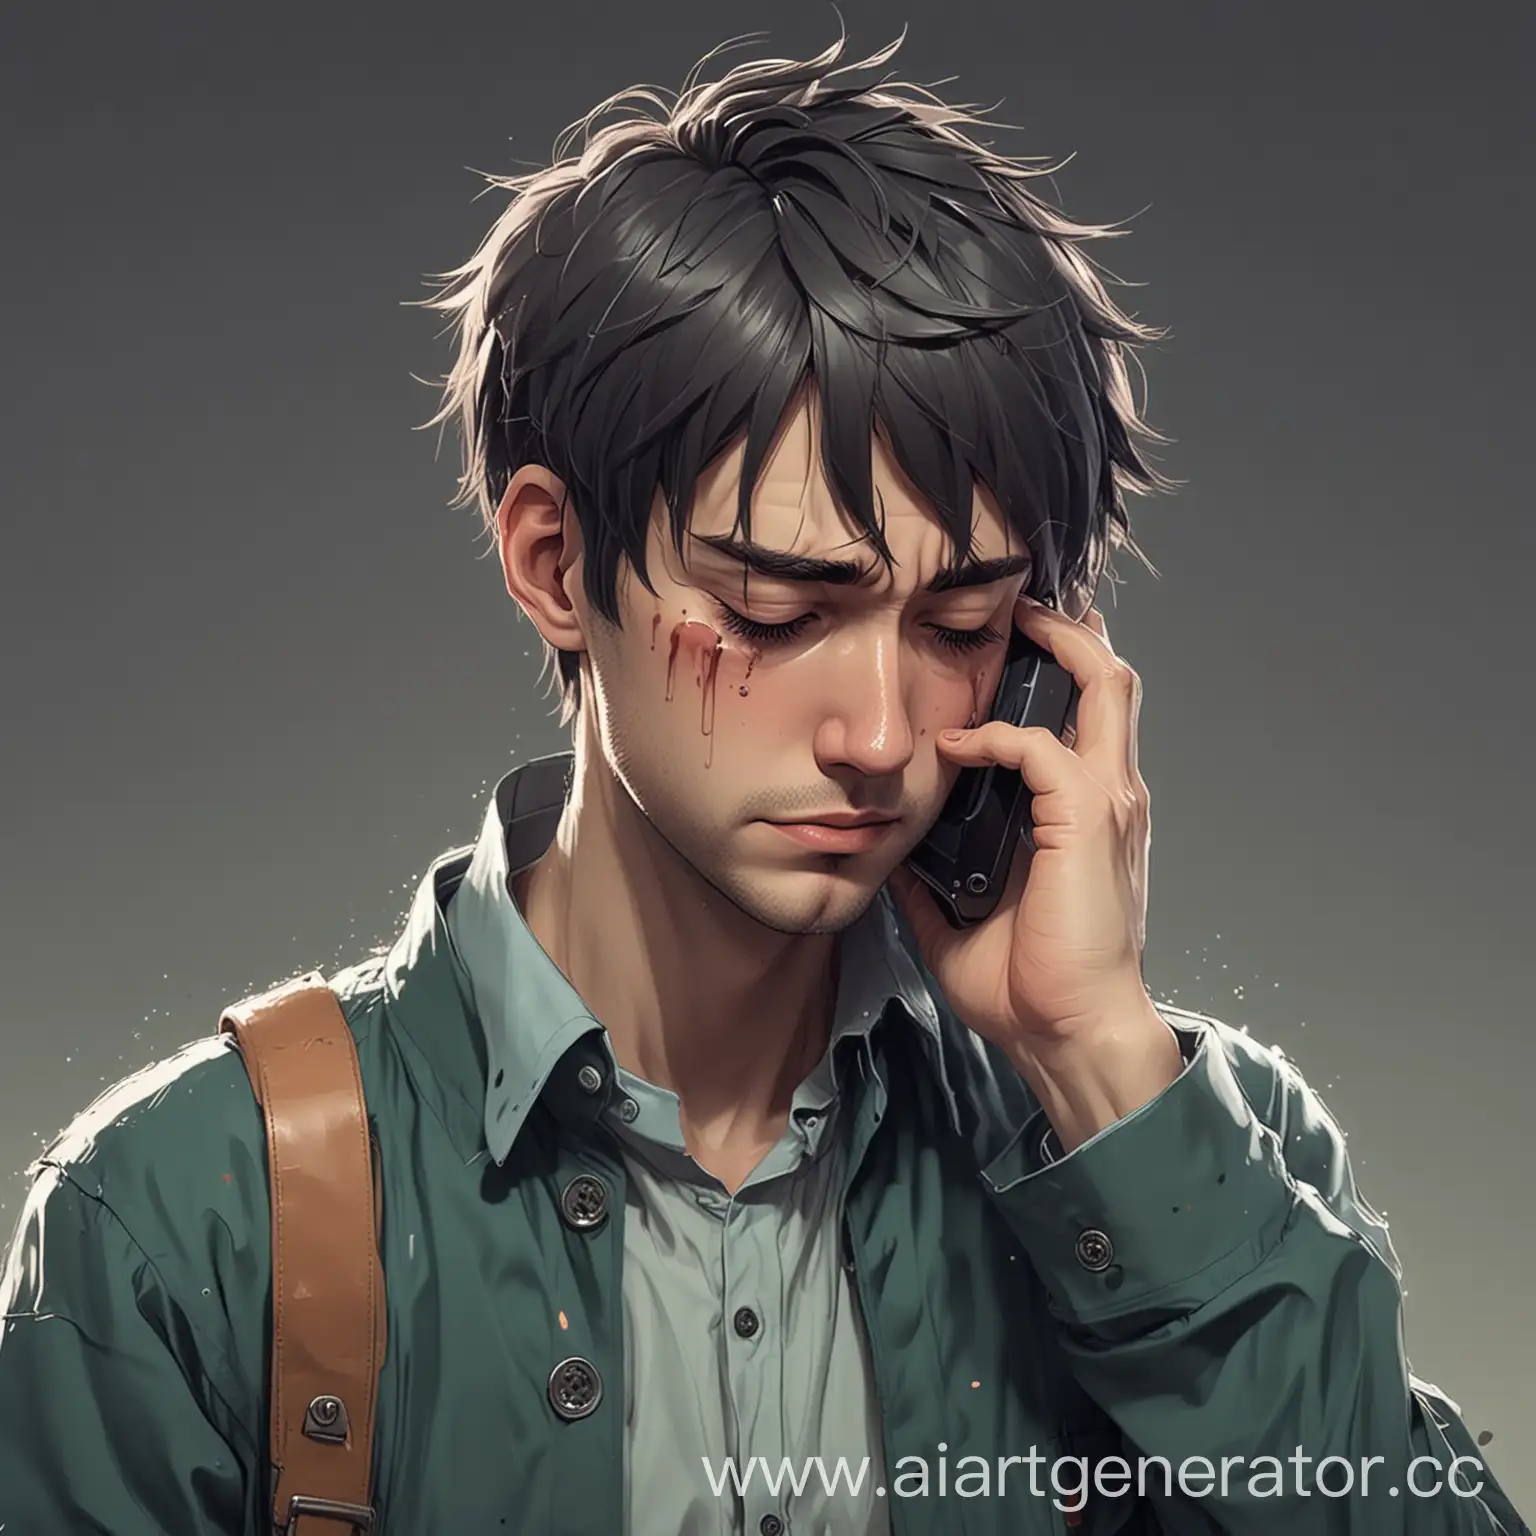 Lonely-Anime-Man-Crying-with-Phone-in-Hand